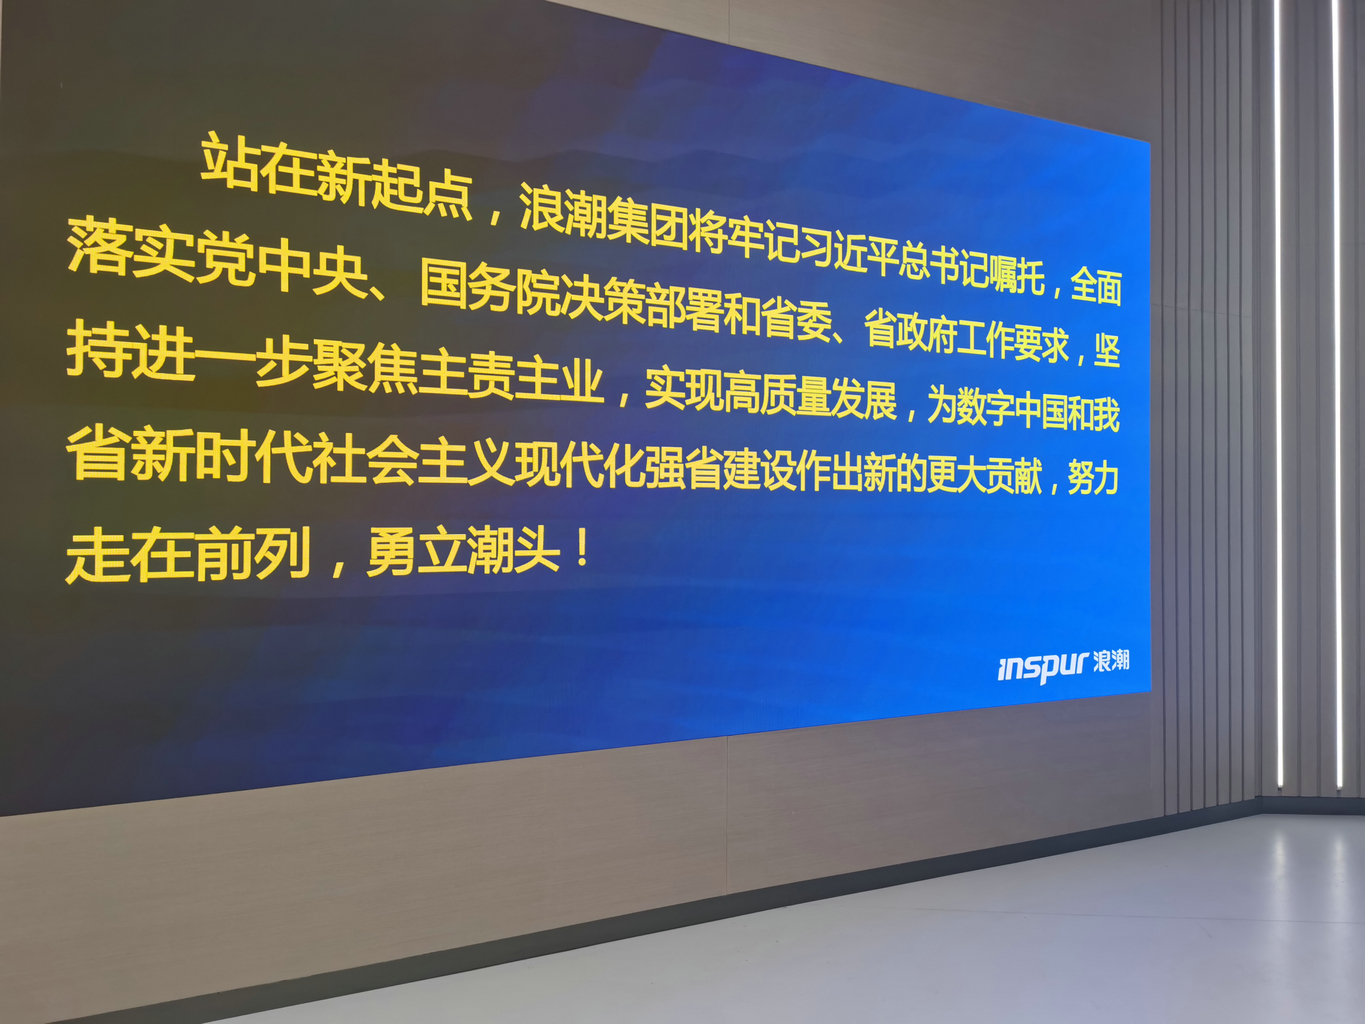 Jiejing Group President Lin Chengbin went to Inspur to discuss in-depth cooperation